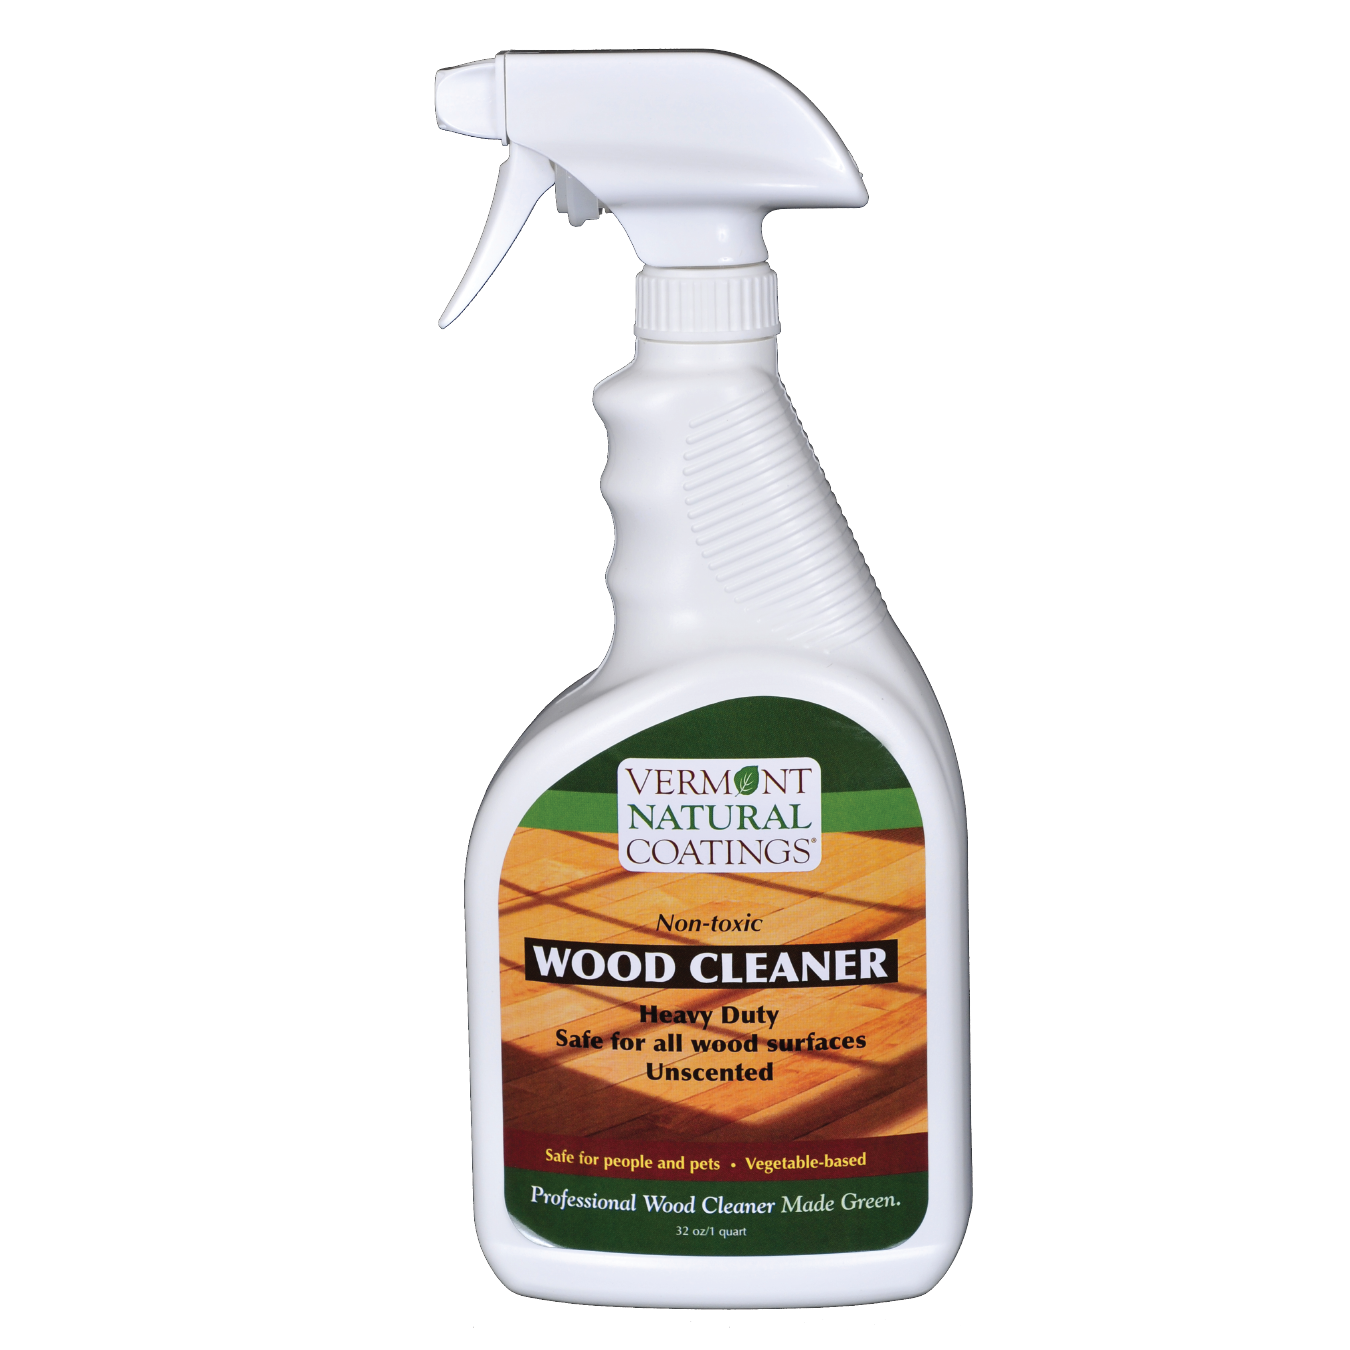 https://vermontnaturalcoatings.com/wp-content/uploads/2020/10/32-oz-cleaner-product-image-01-01.png